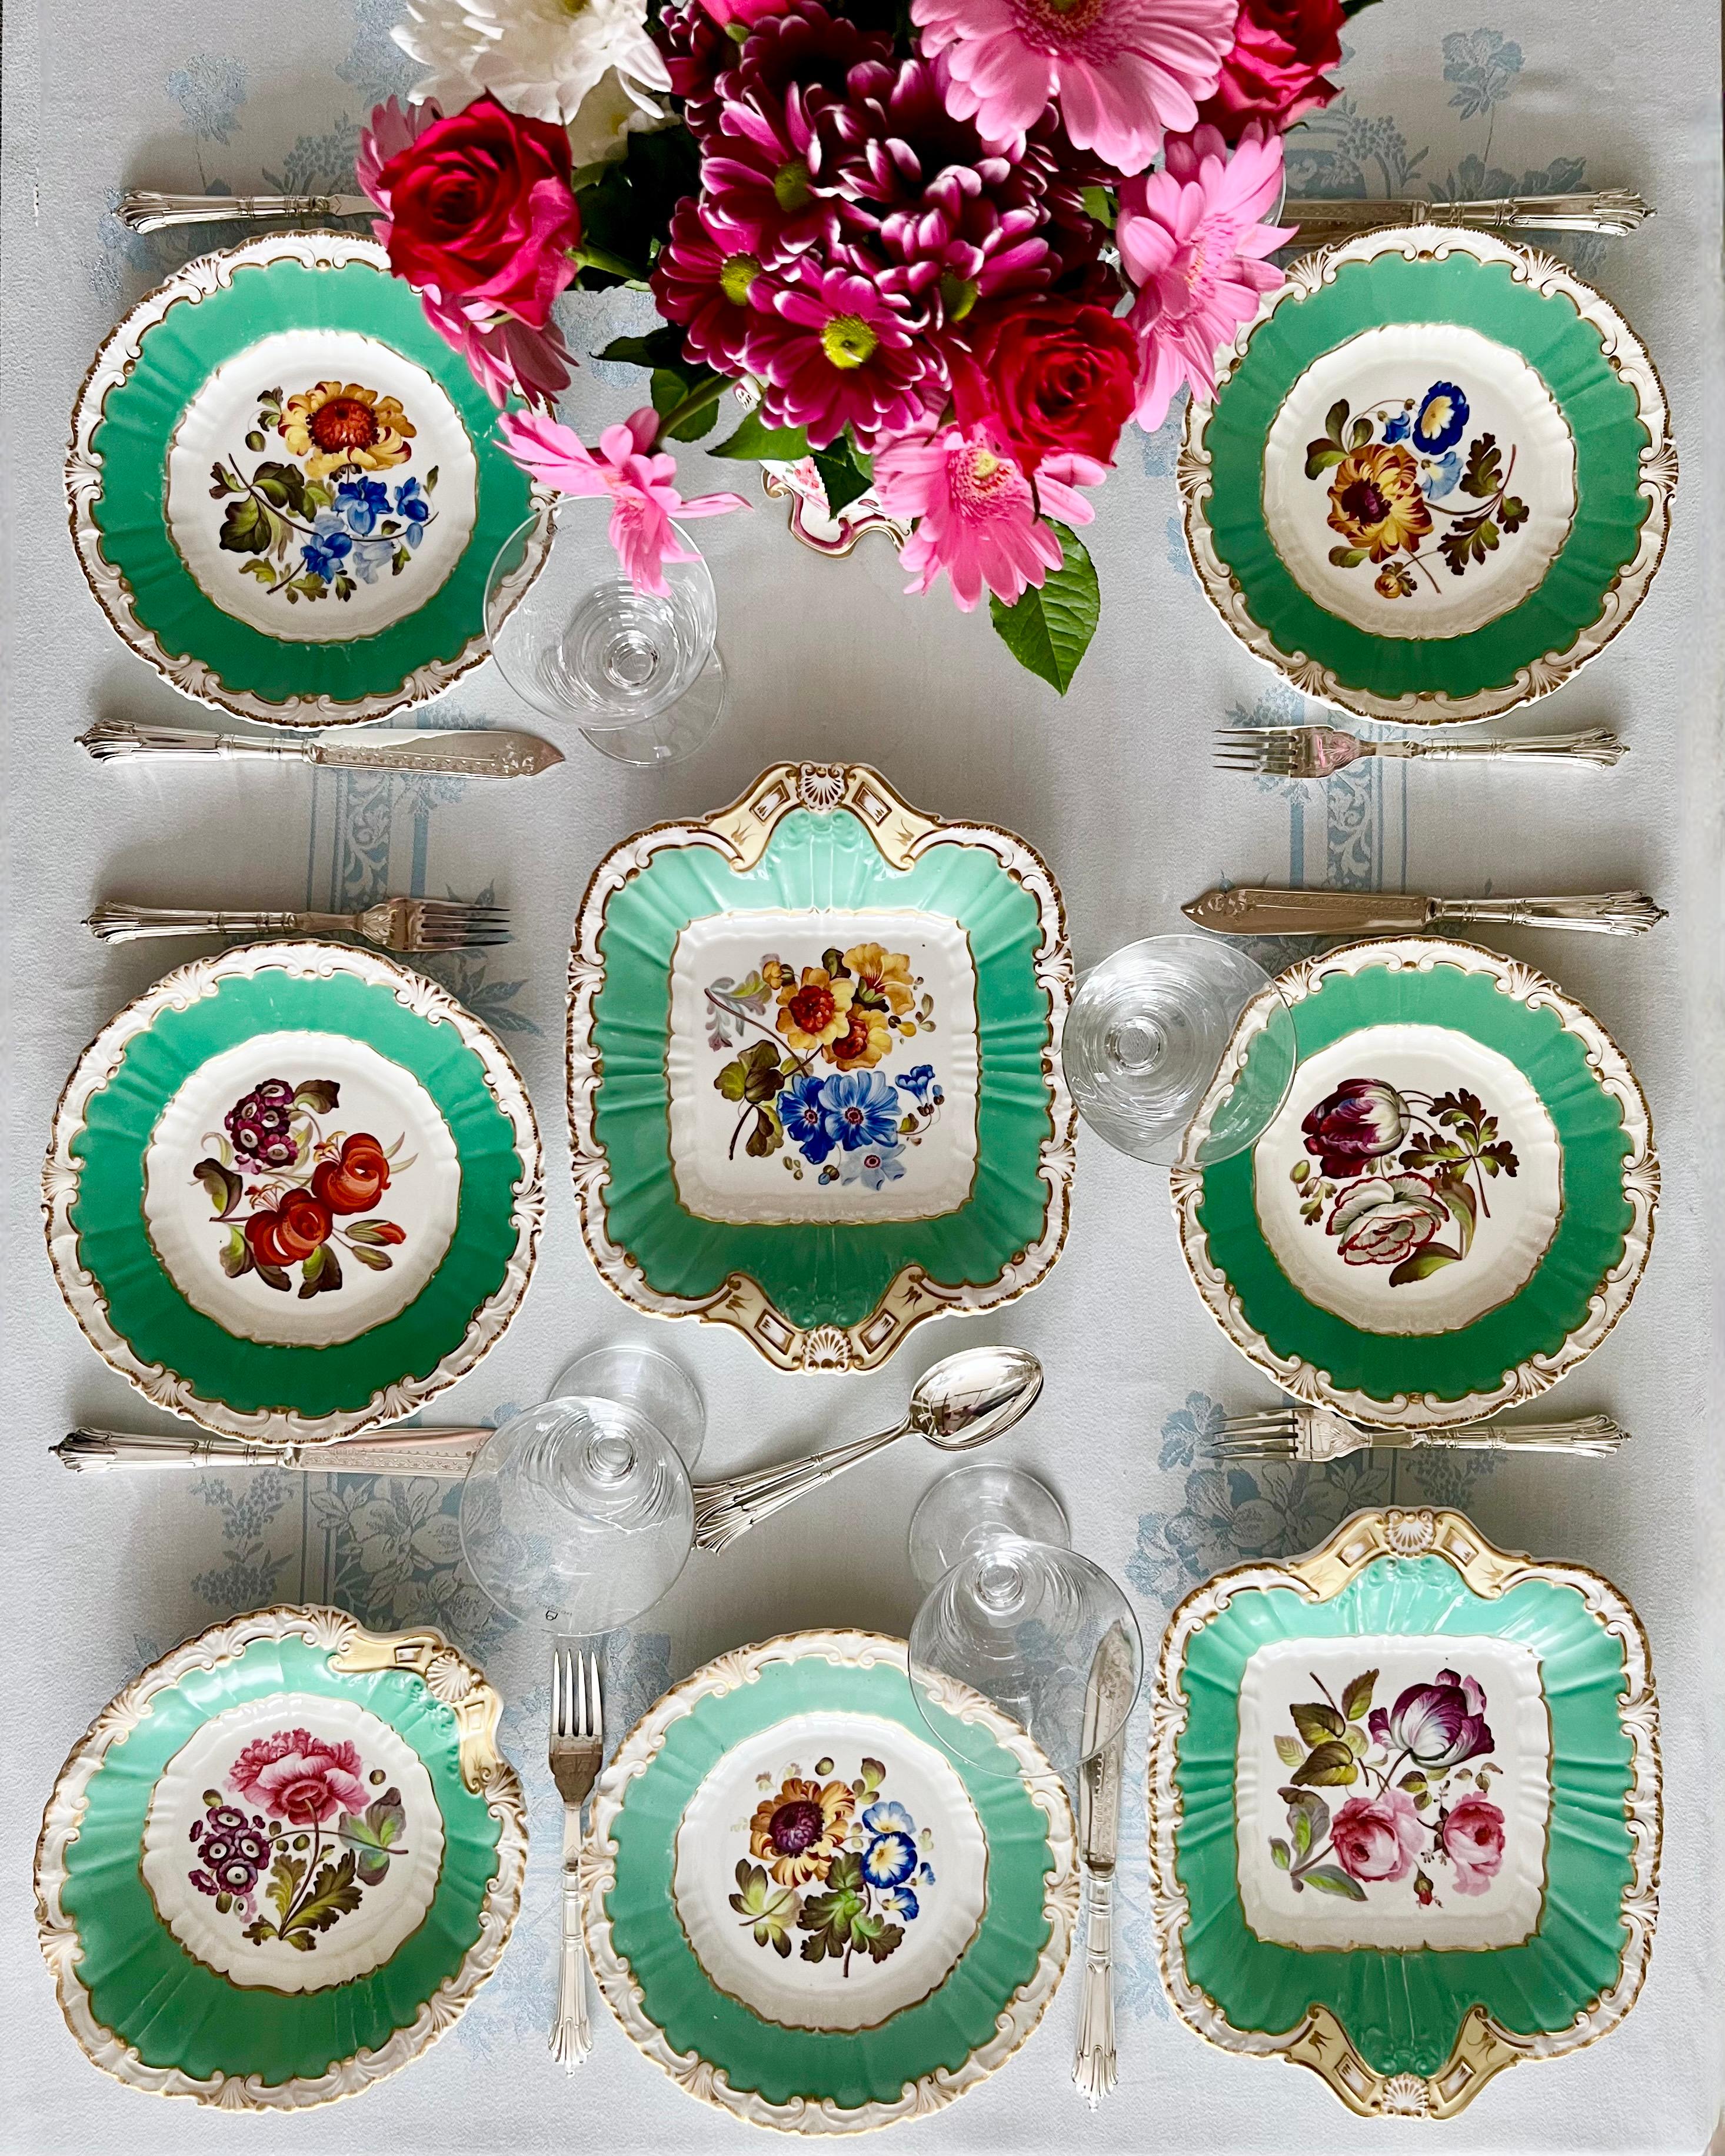 This is a stunning part dessert service made by H&R Daniel between 1828 and 1831. The set consists of 2 square dishes, one round dish and five plates, and it is of sublime decorative quality.

The H & R Daniel porcelain factory was founded by